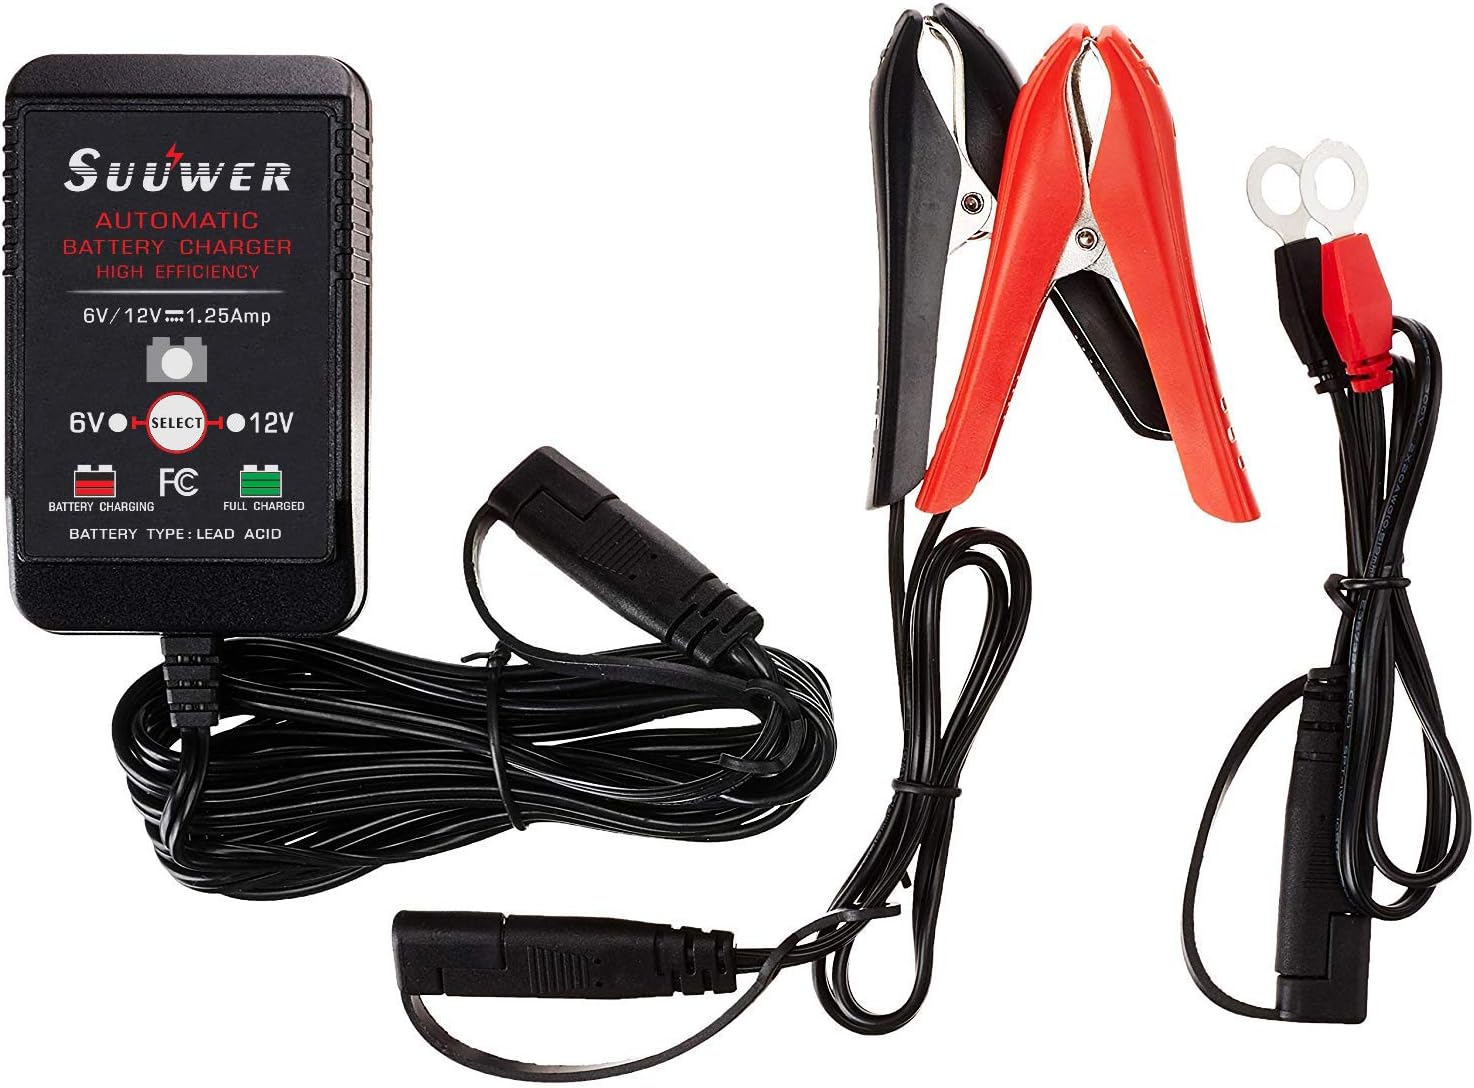 Suuwer 1.25-Amp Trickle Battery Charger 6V/12V Fully-Automatic Smart Battery Maintainer for Motorcycle, ATV, Boat, Lawn Mower and More 6V/12V @ 1.25 AMP